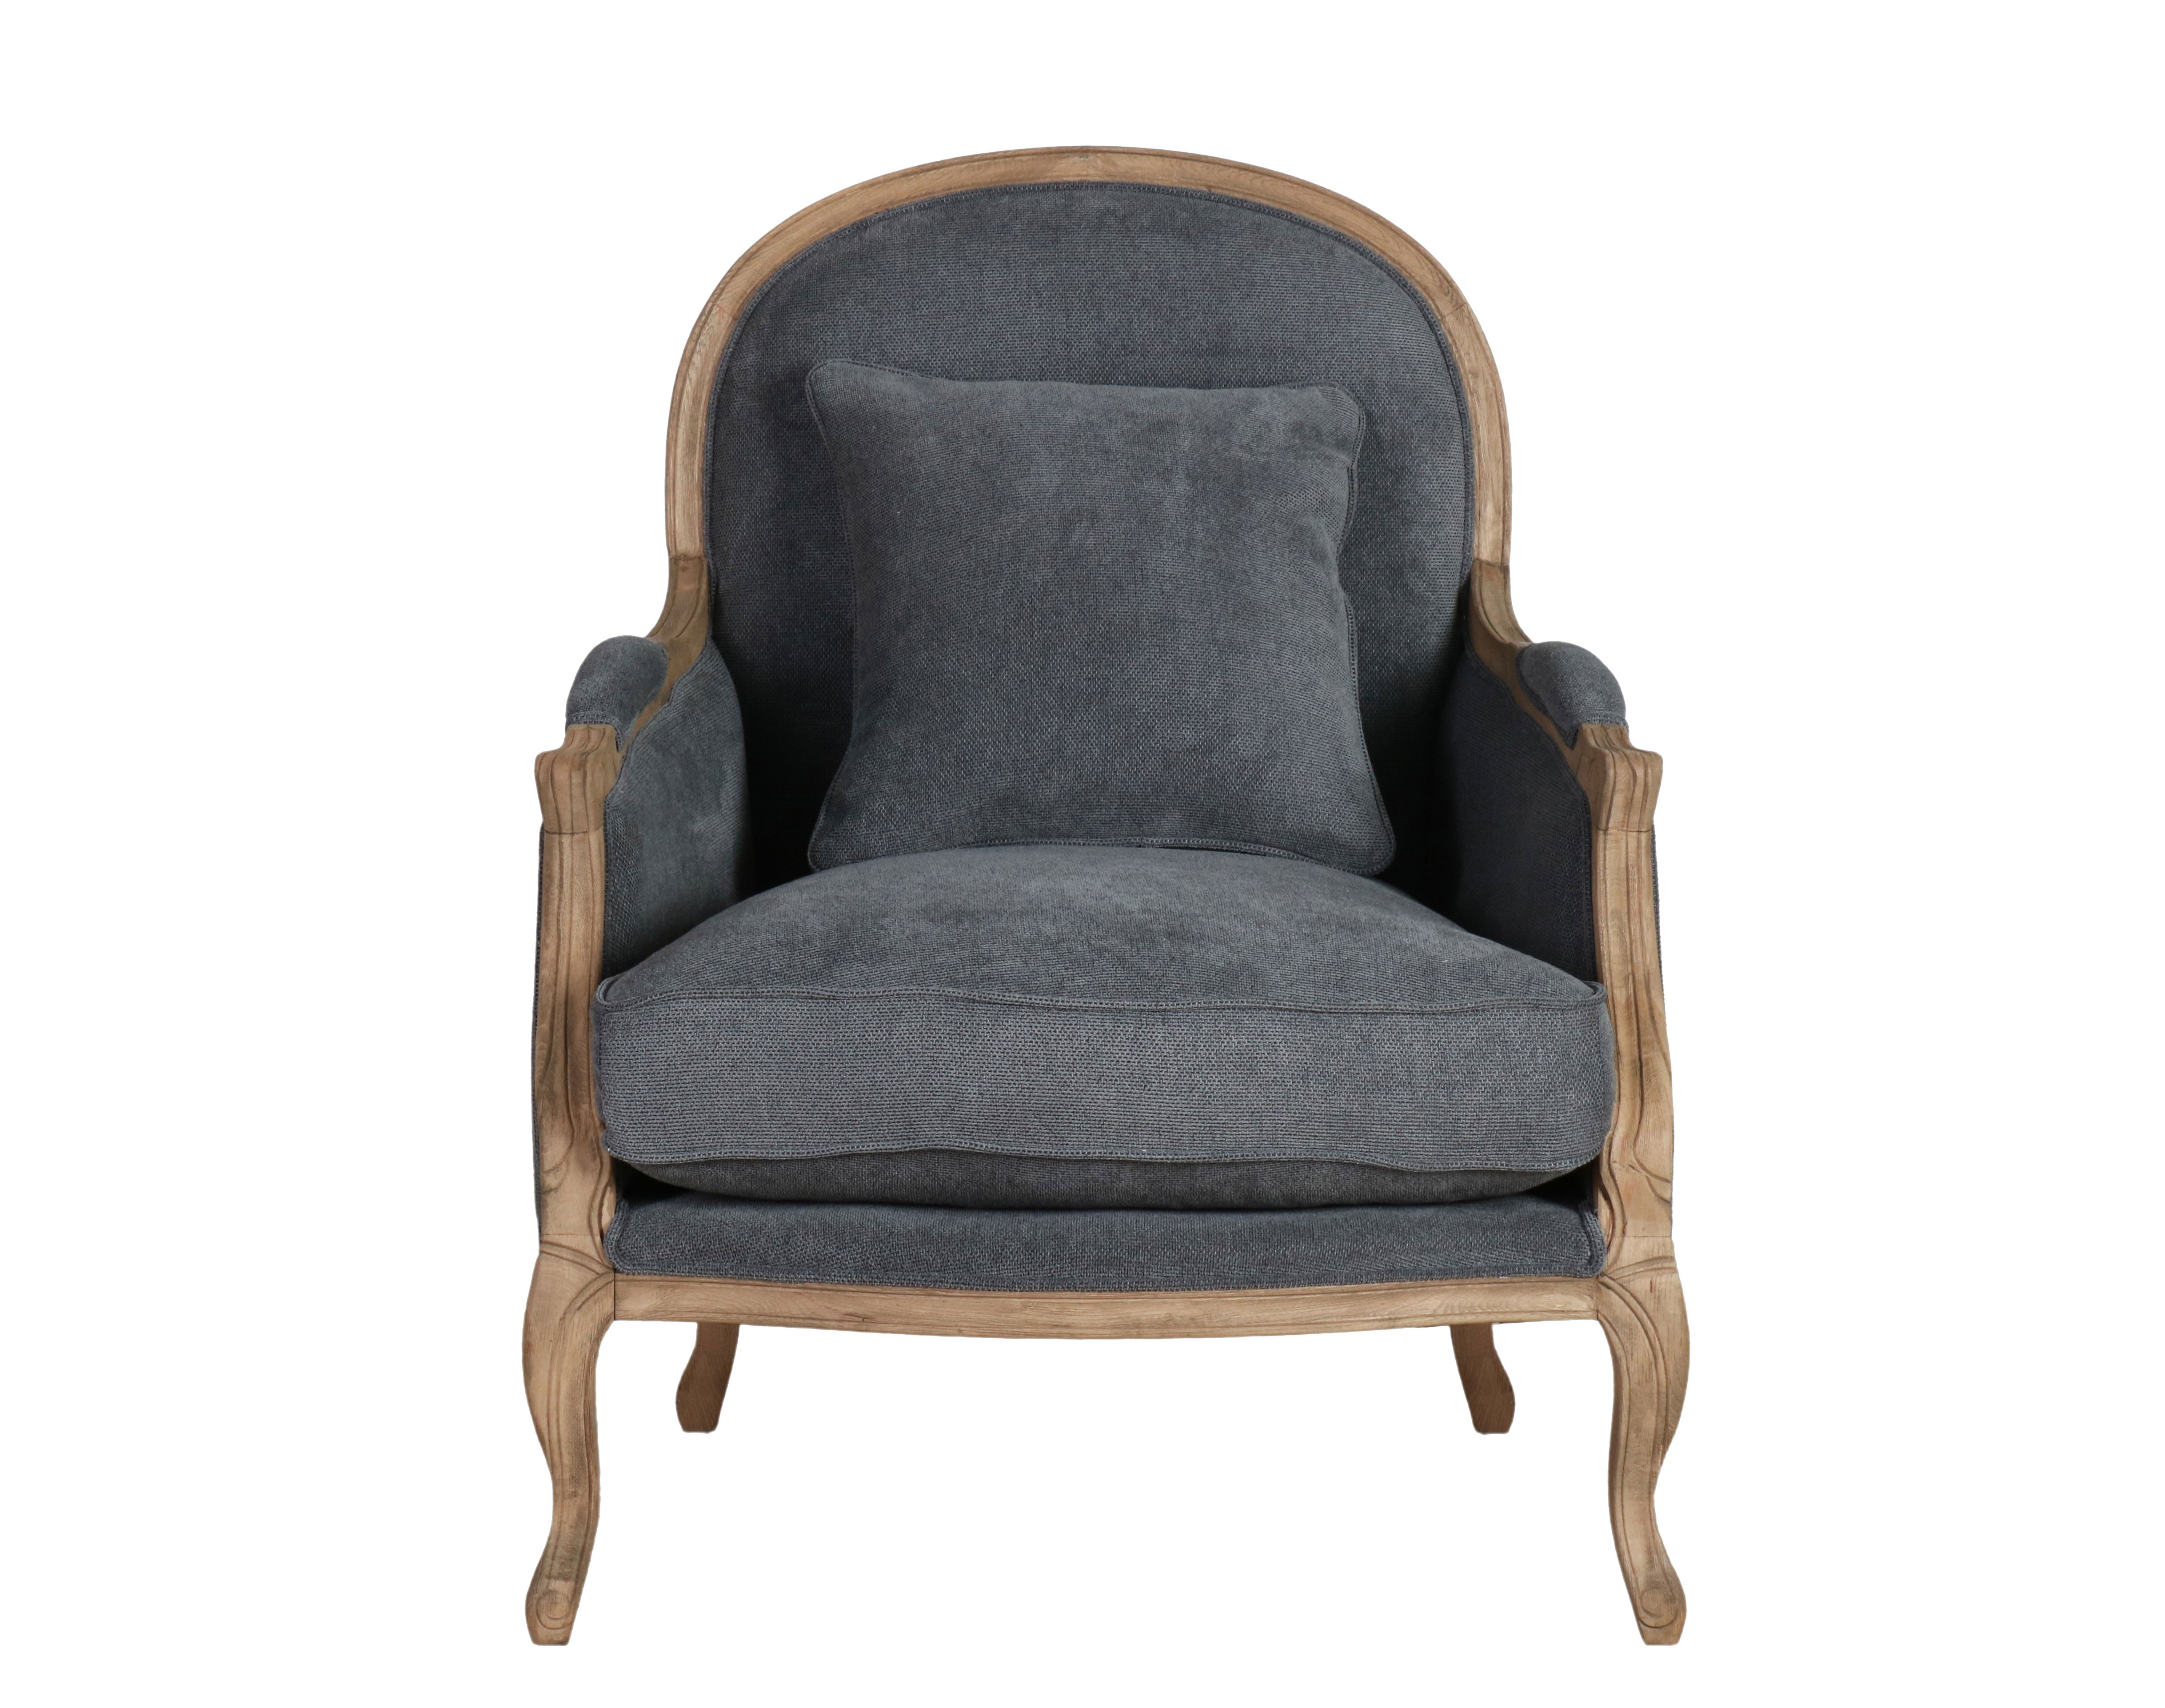 Grey upholstered chair with oak frame